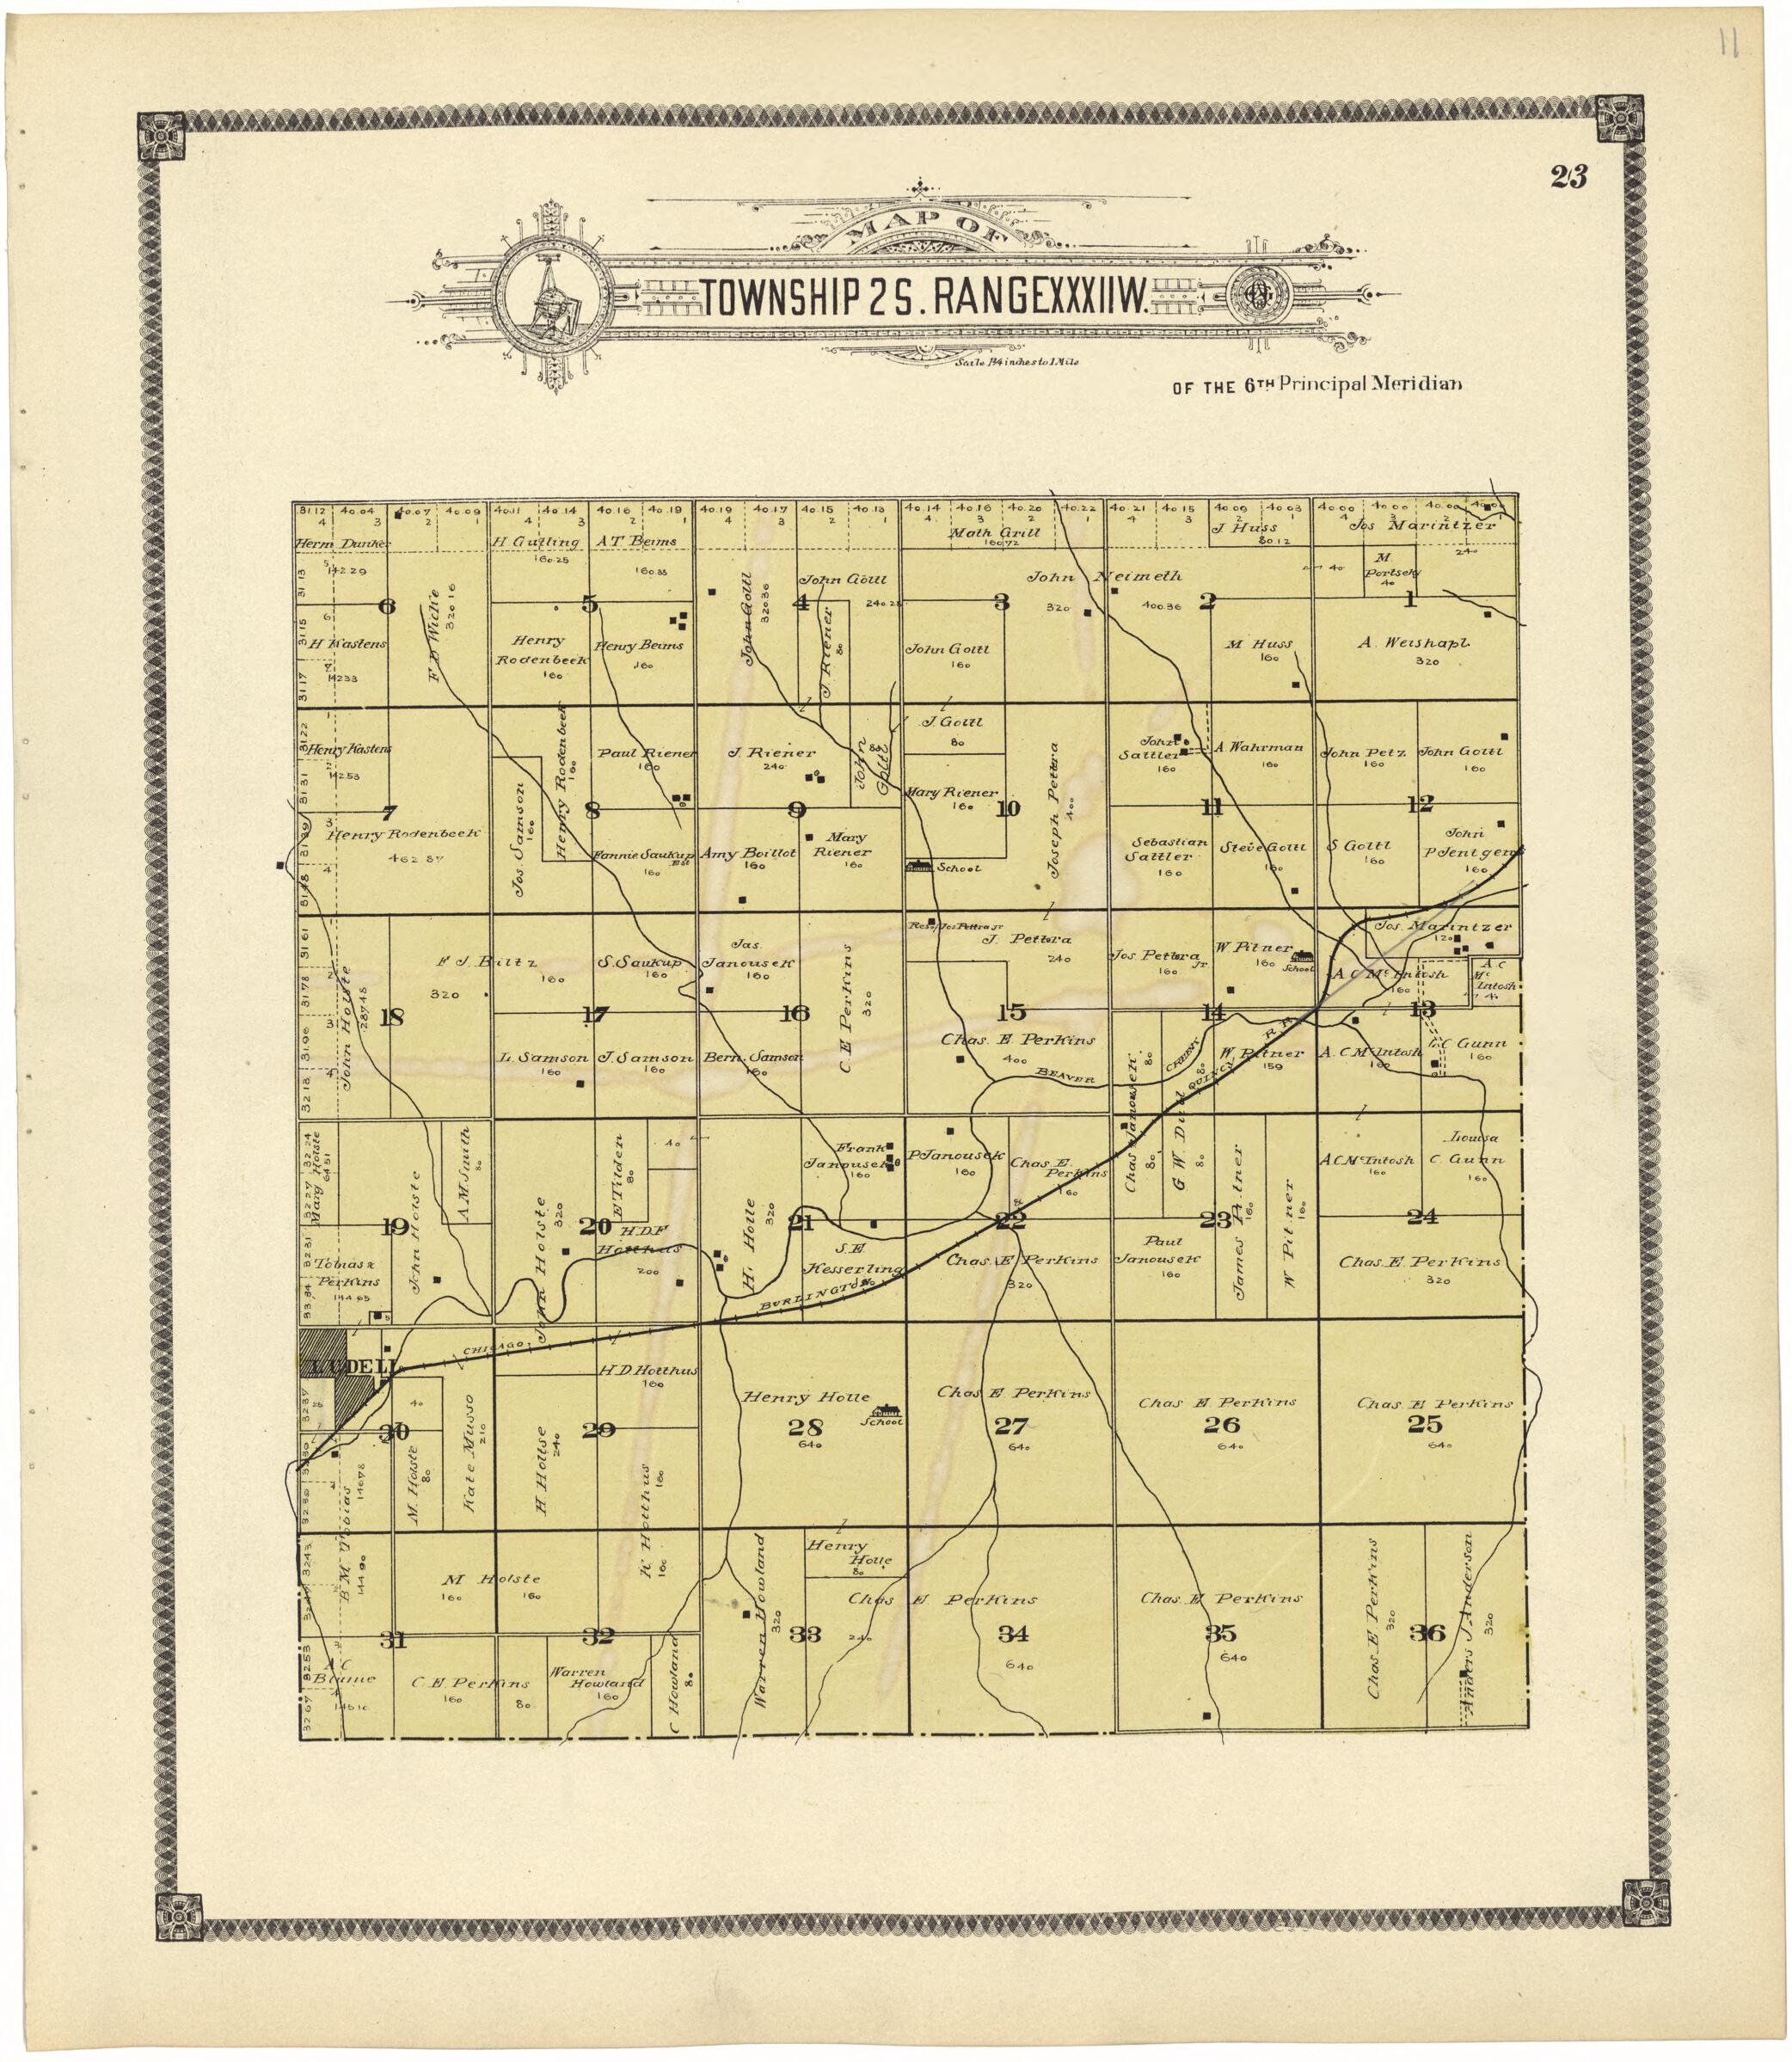 This old map of Map of Township 2 S. Range XXXII W. from Standard Atlas of Rawlins County, Kansas from 1906 was created by  Geo. A. Ogle &amp; Co in 1906